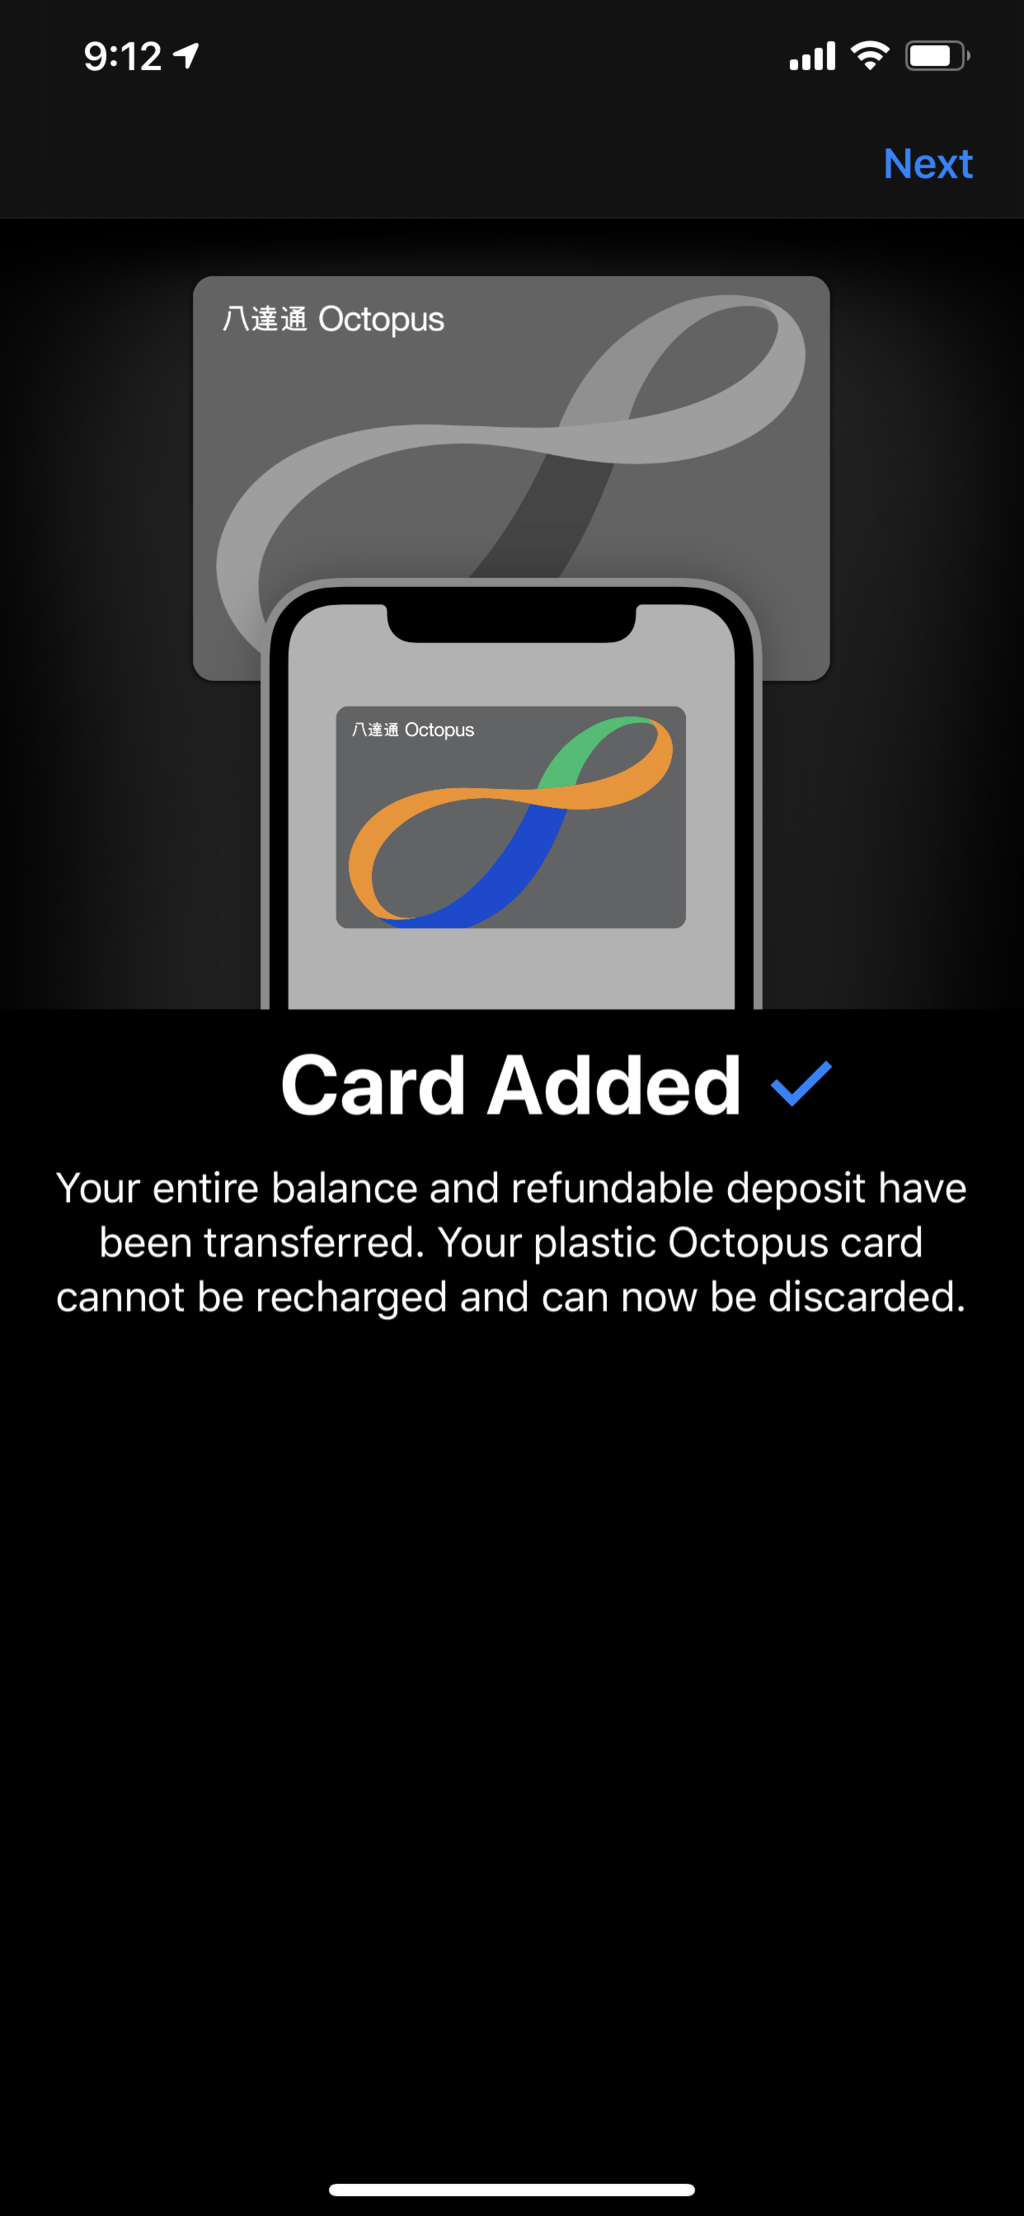 When your card is setup succesfully you will see this screen and the card will now be on your iPhone / Image courtesy of Brent Deverman